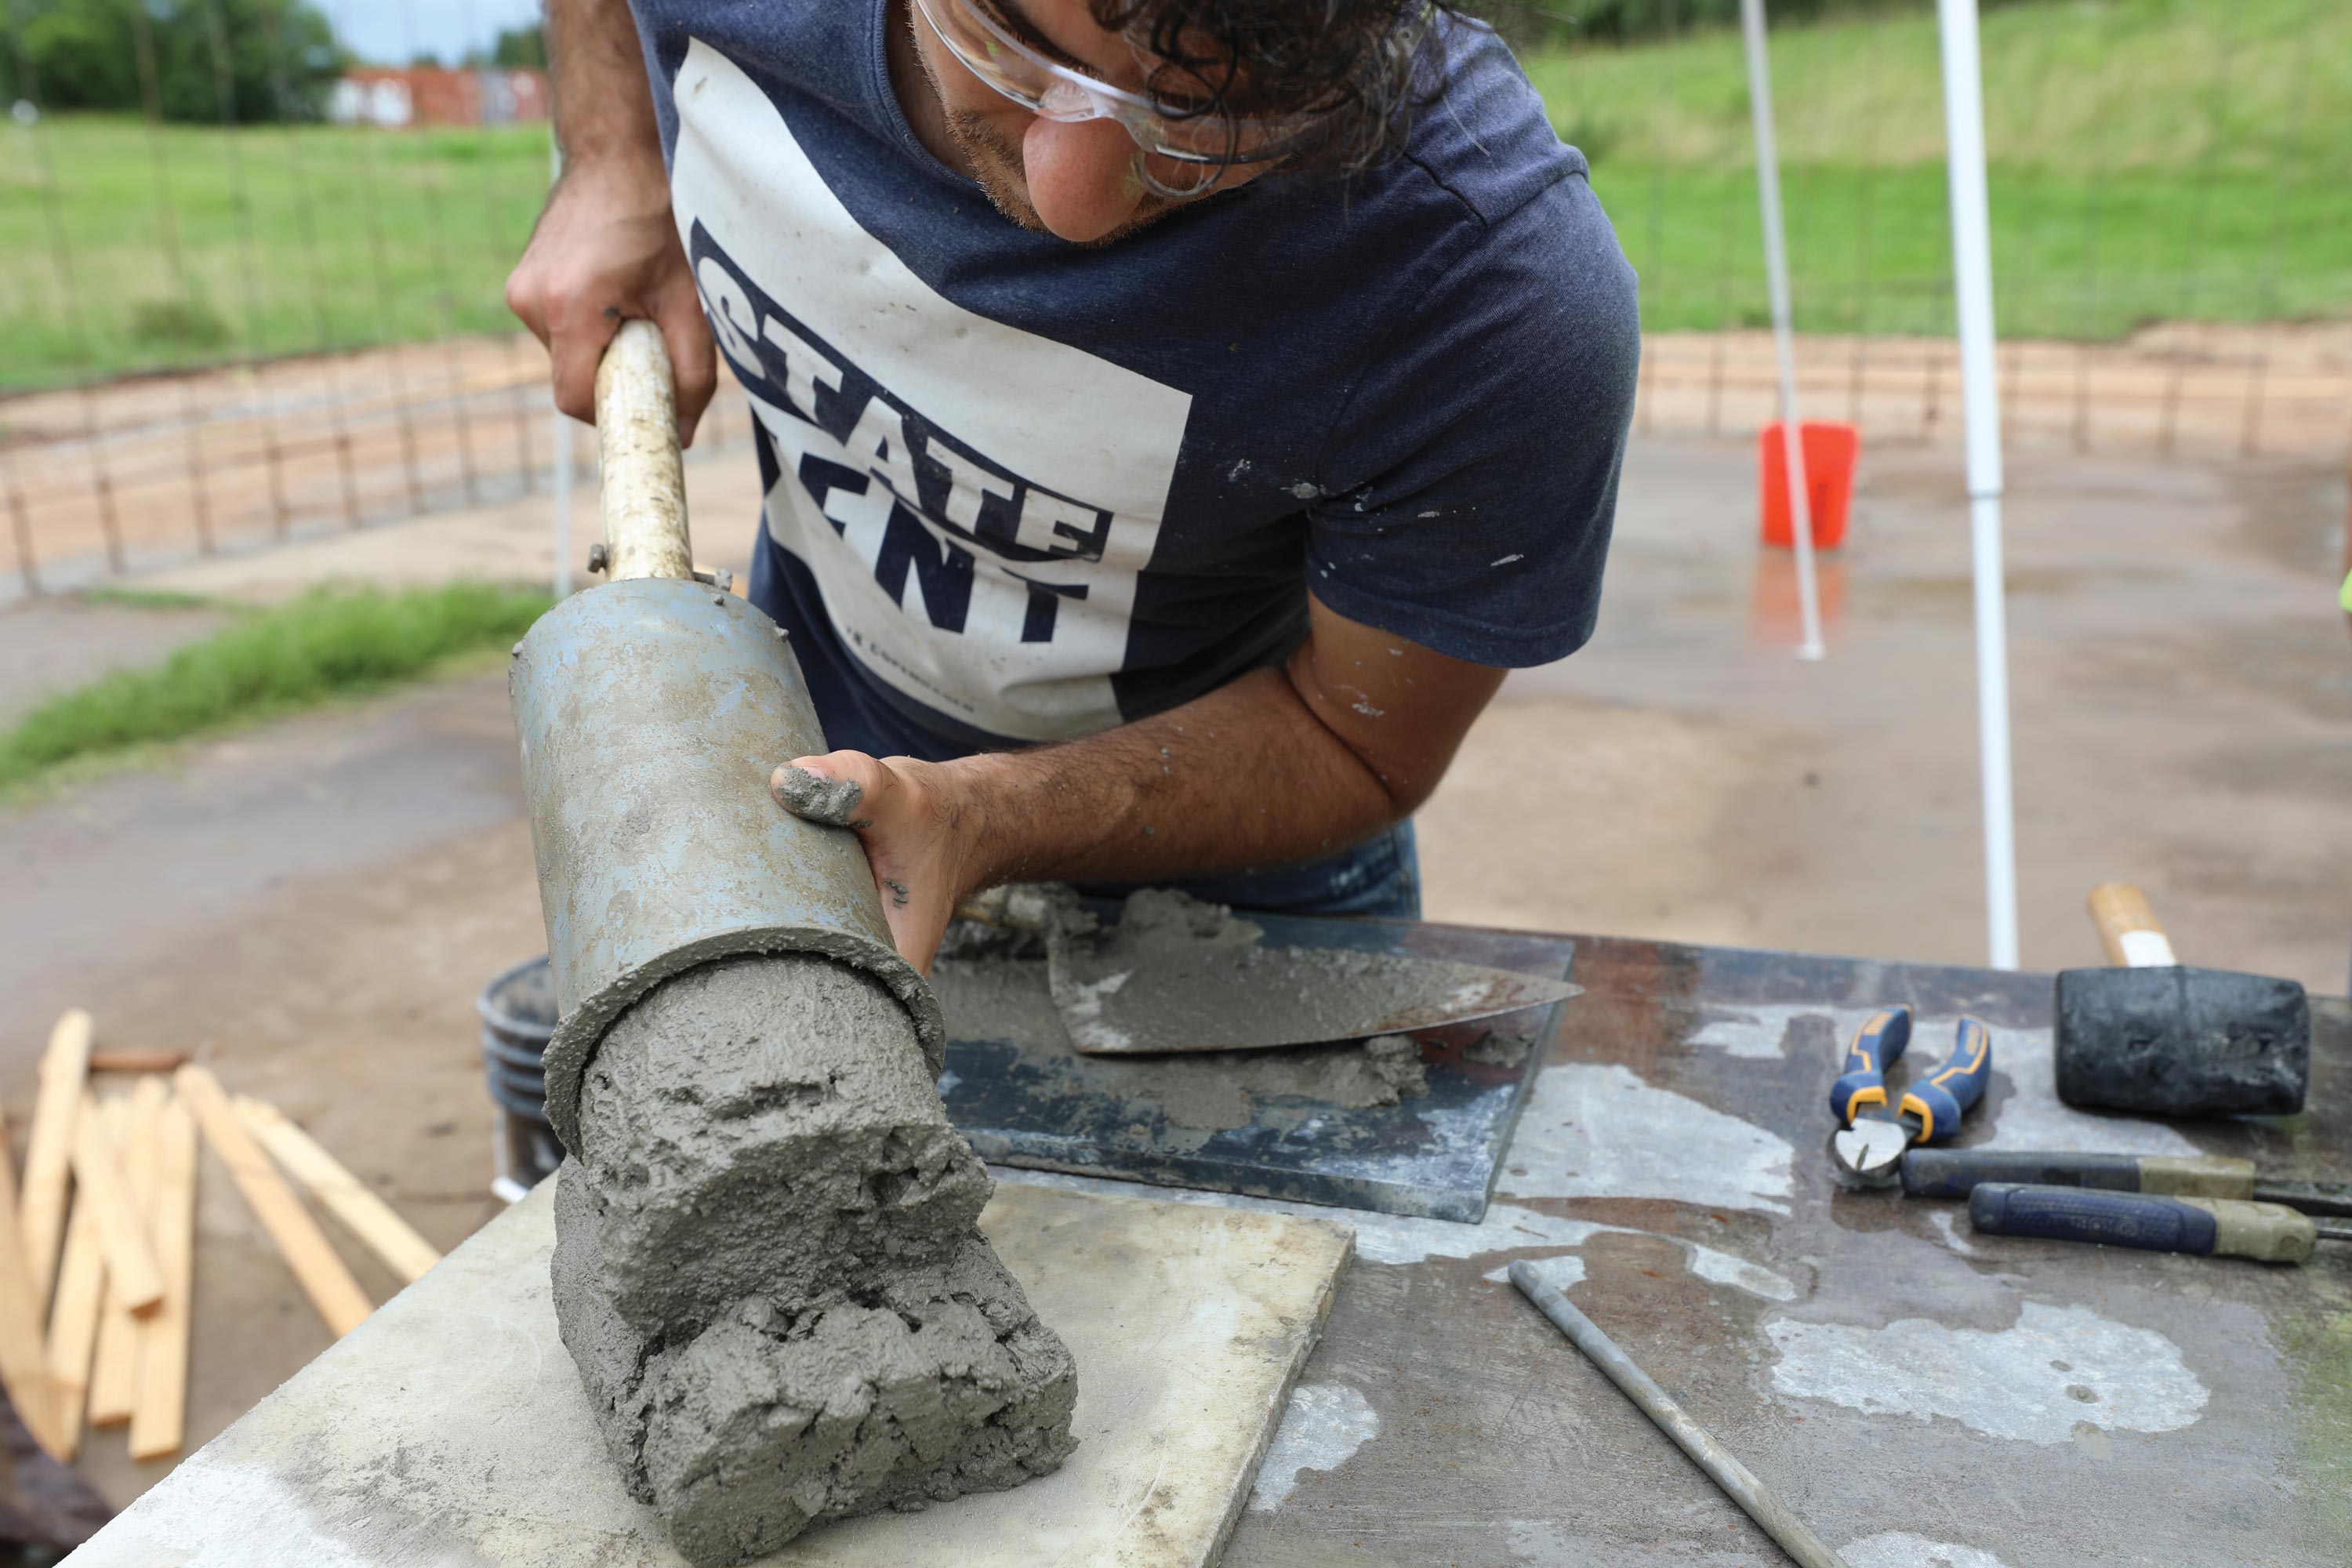 Masoud Forsat tests the concrete being used for the 3D printed structure.